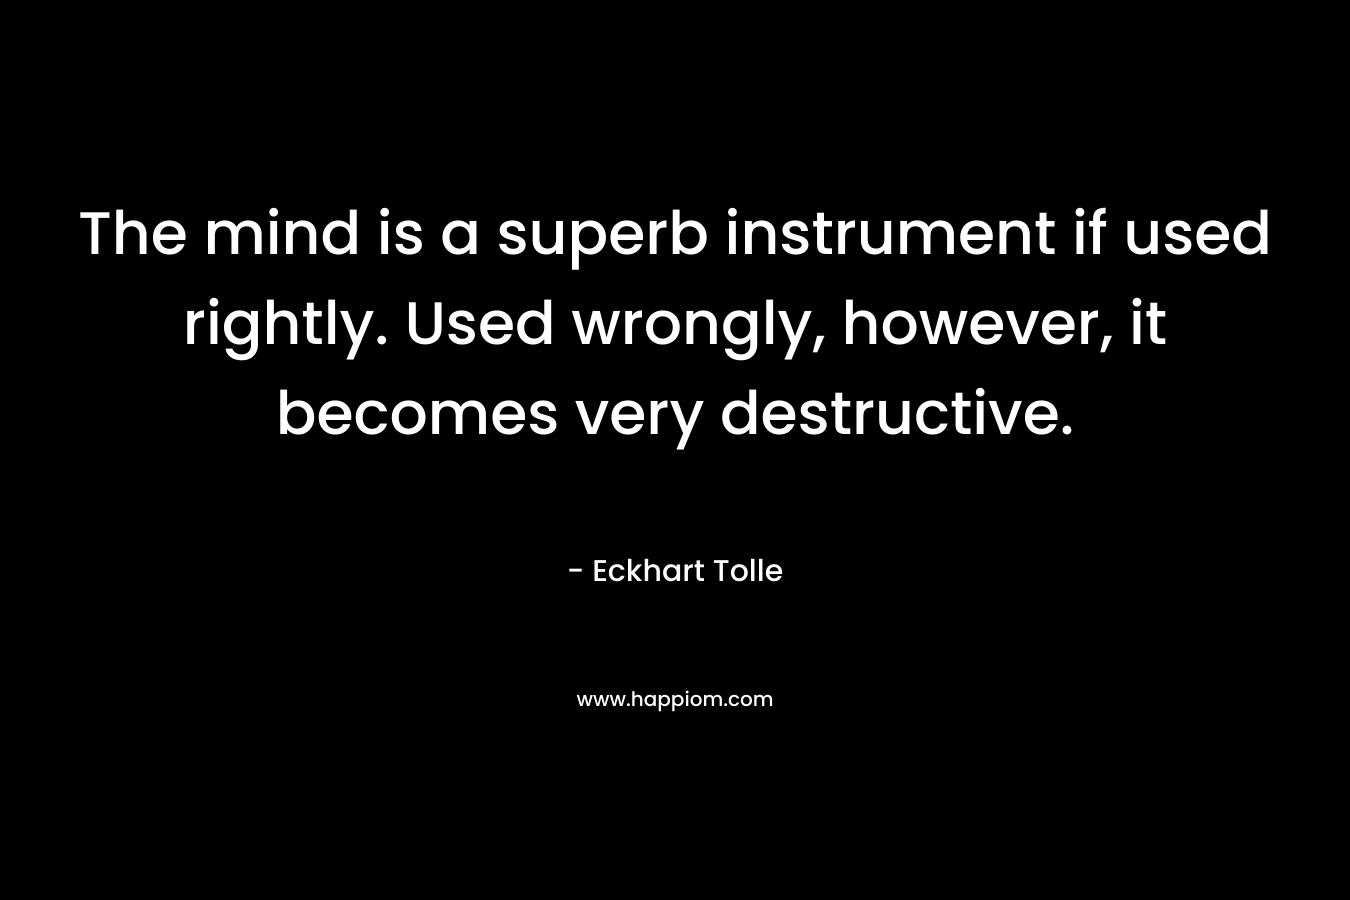 The mind is a superb instrument if used rightly. Used wrongly, however, it becomes very destructive. – Eckhart Tolle